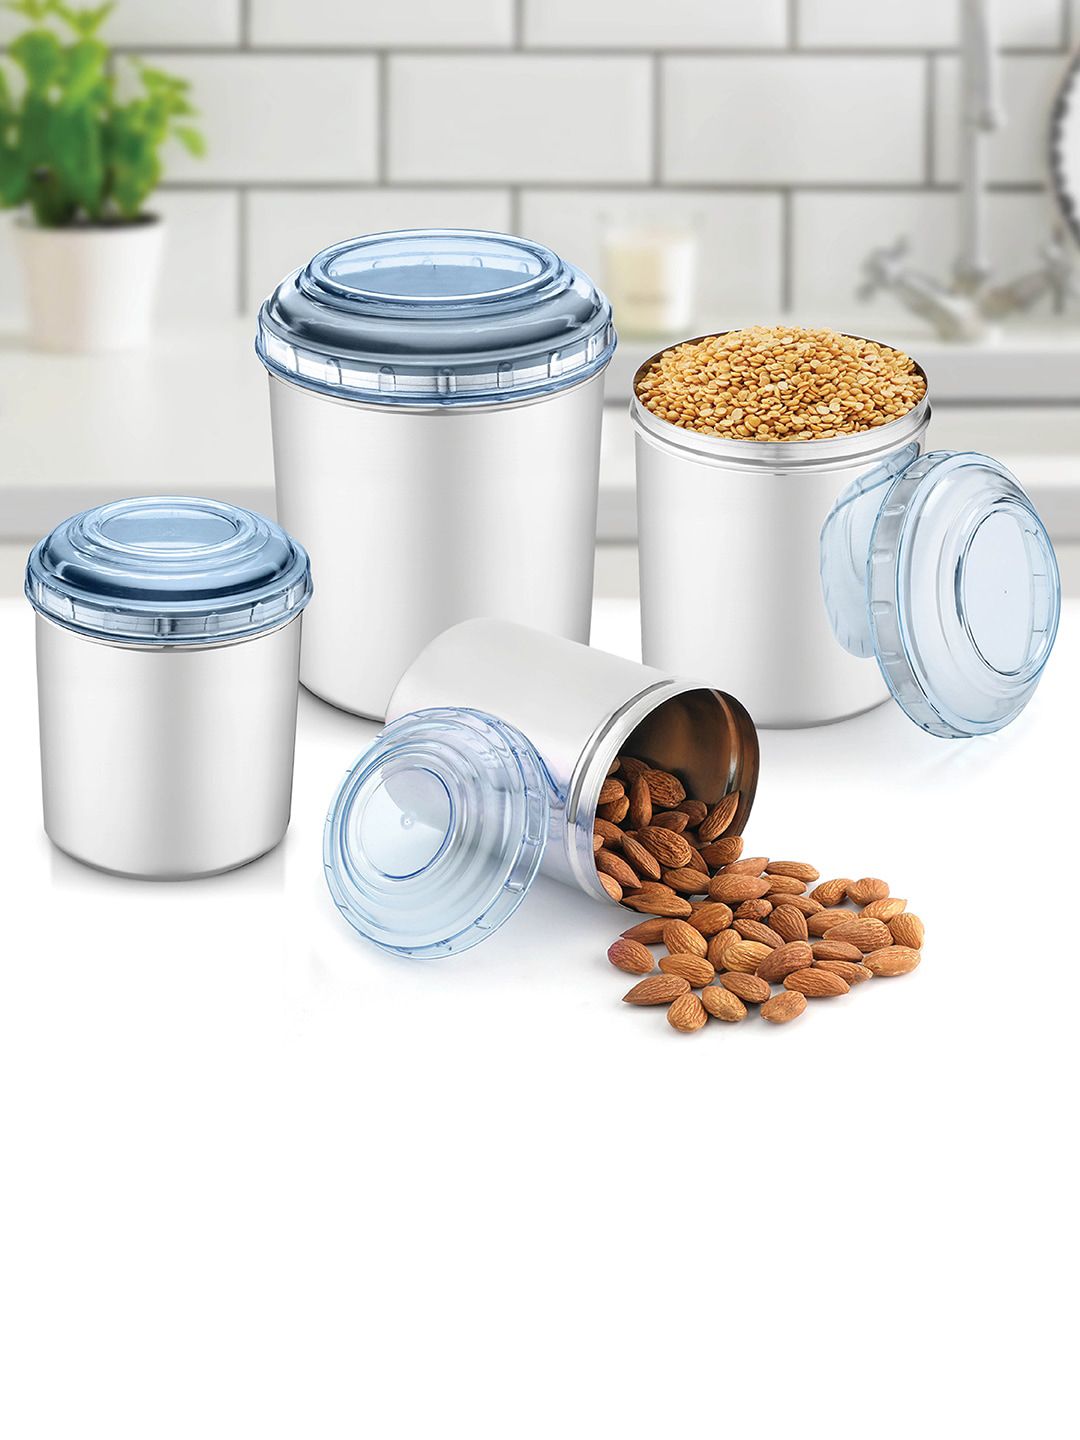 Jensons Set Of 16 Blue & Silver-Toned Stainless Steel Canisters Price in India